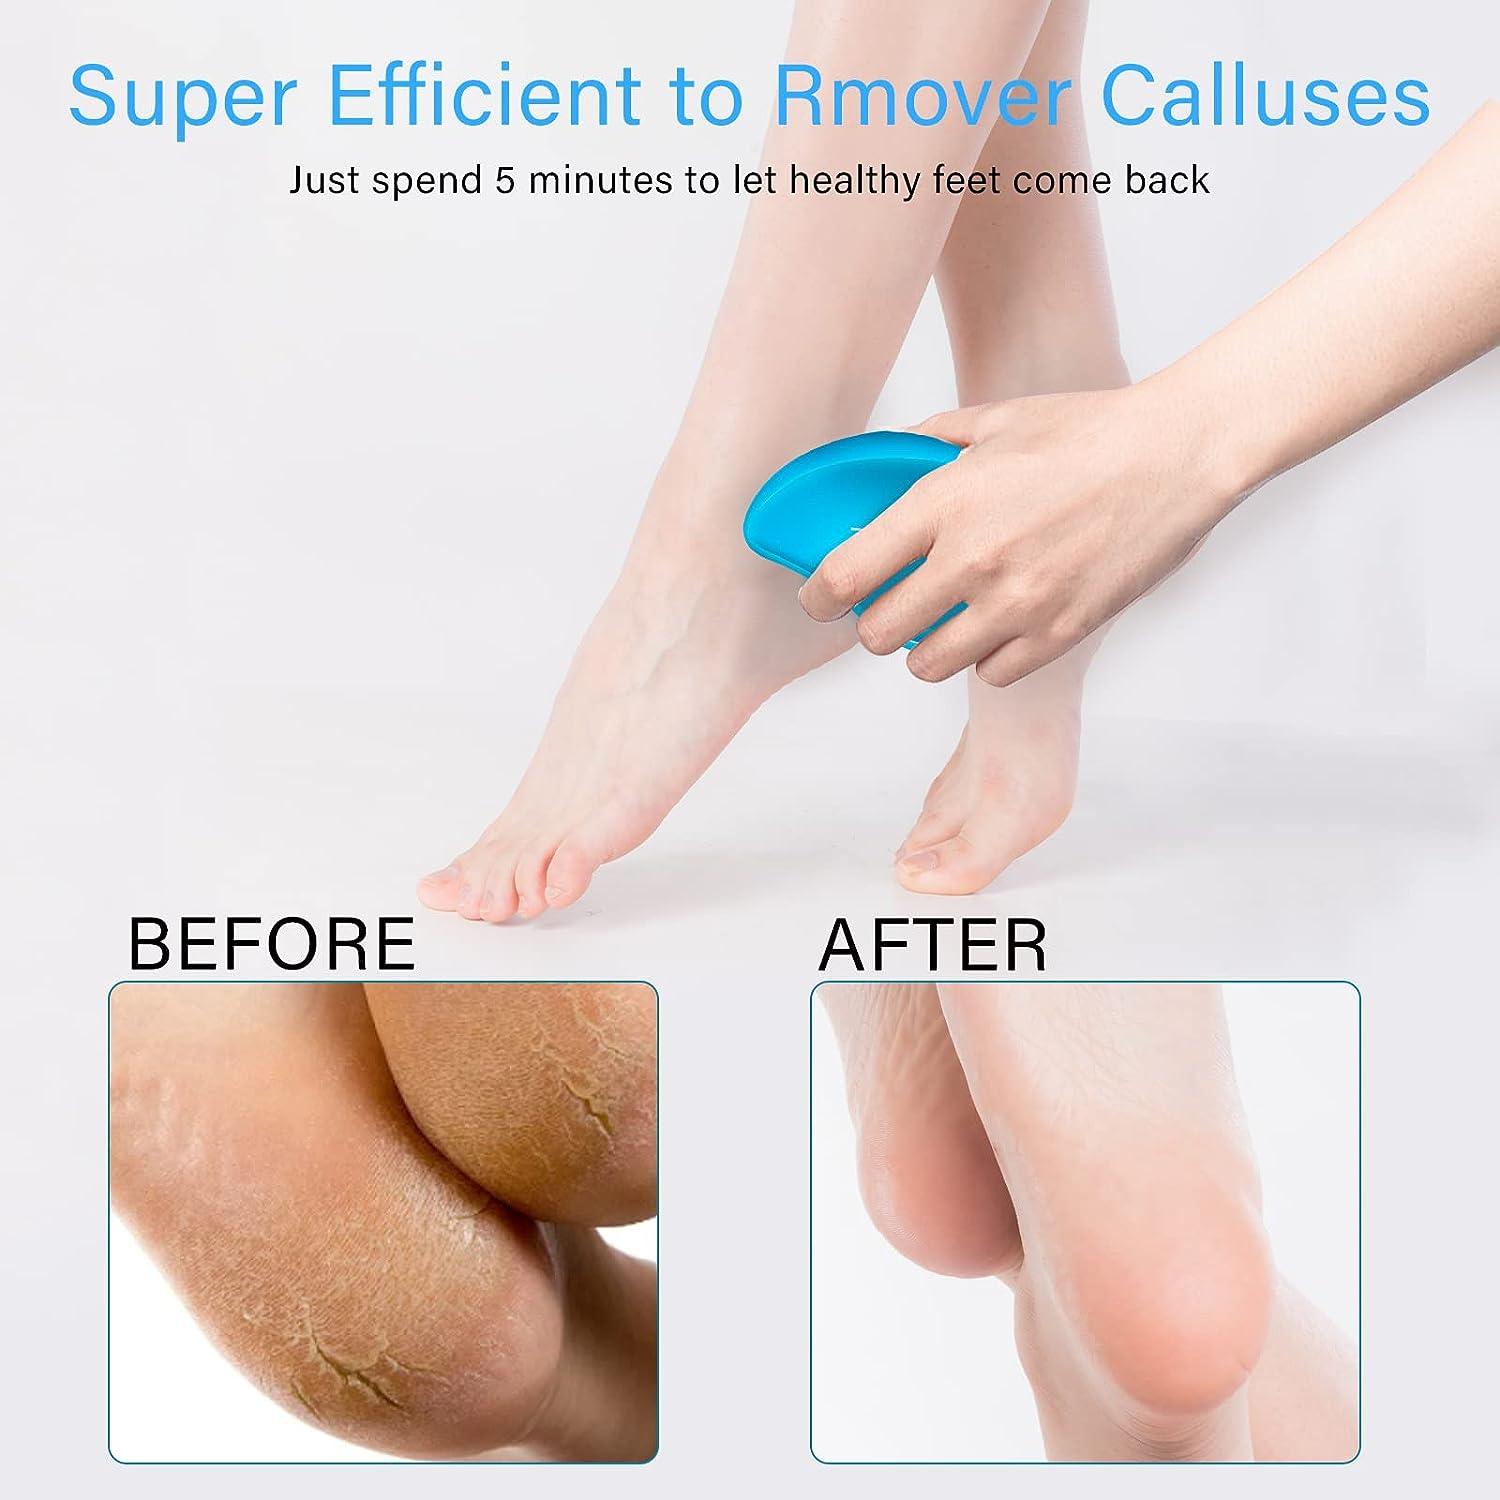 Dead Skin Remover for Feet, Foot Scrubber for Use in Shower, Foot File  Callus Remover for Feet, Foot Scraper & Glass Foot File Callus Remover Tool